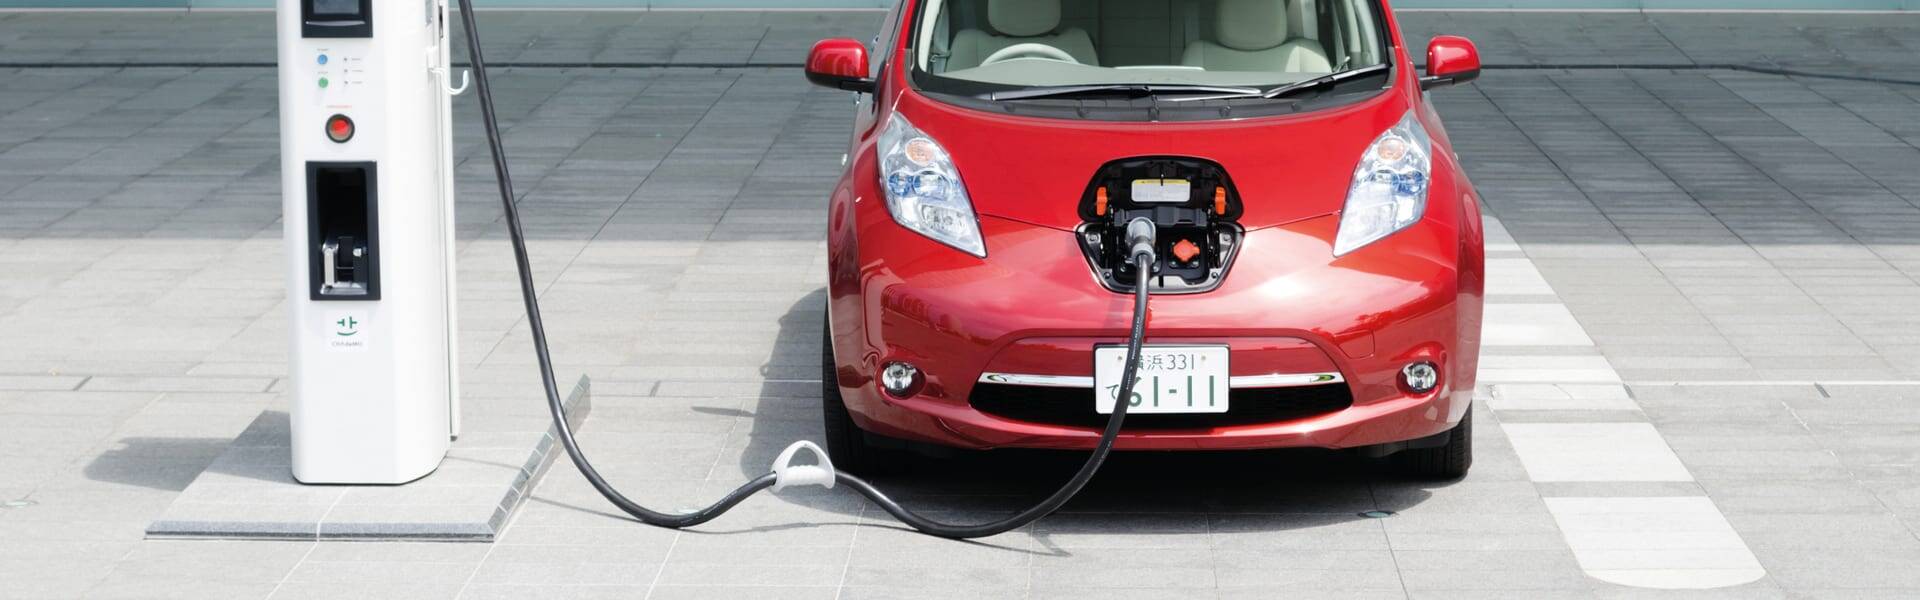 Octopus Electric Vehicles launches new ‘V2G bundle’